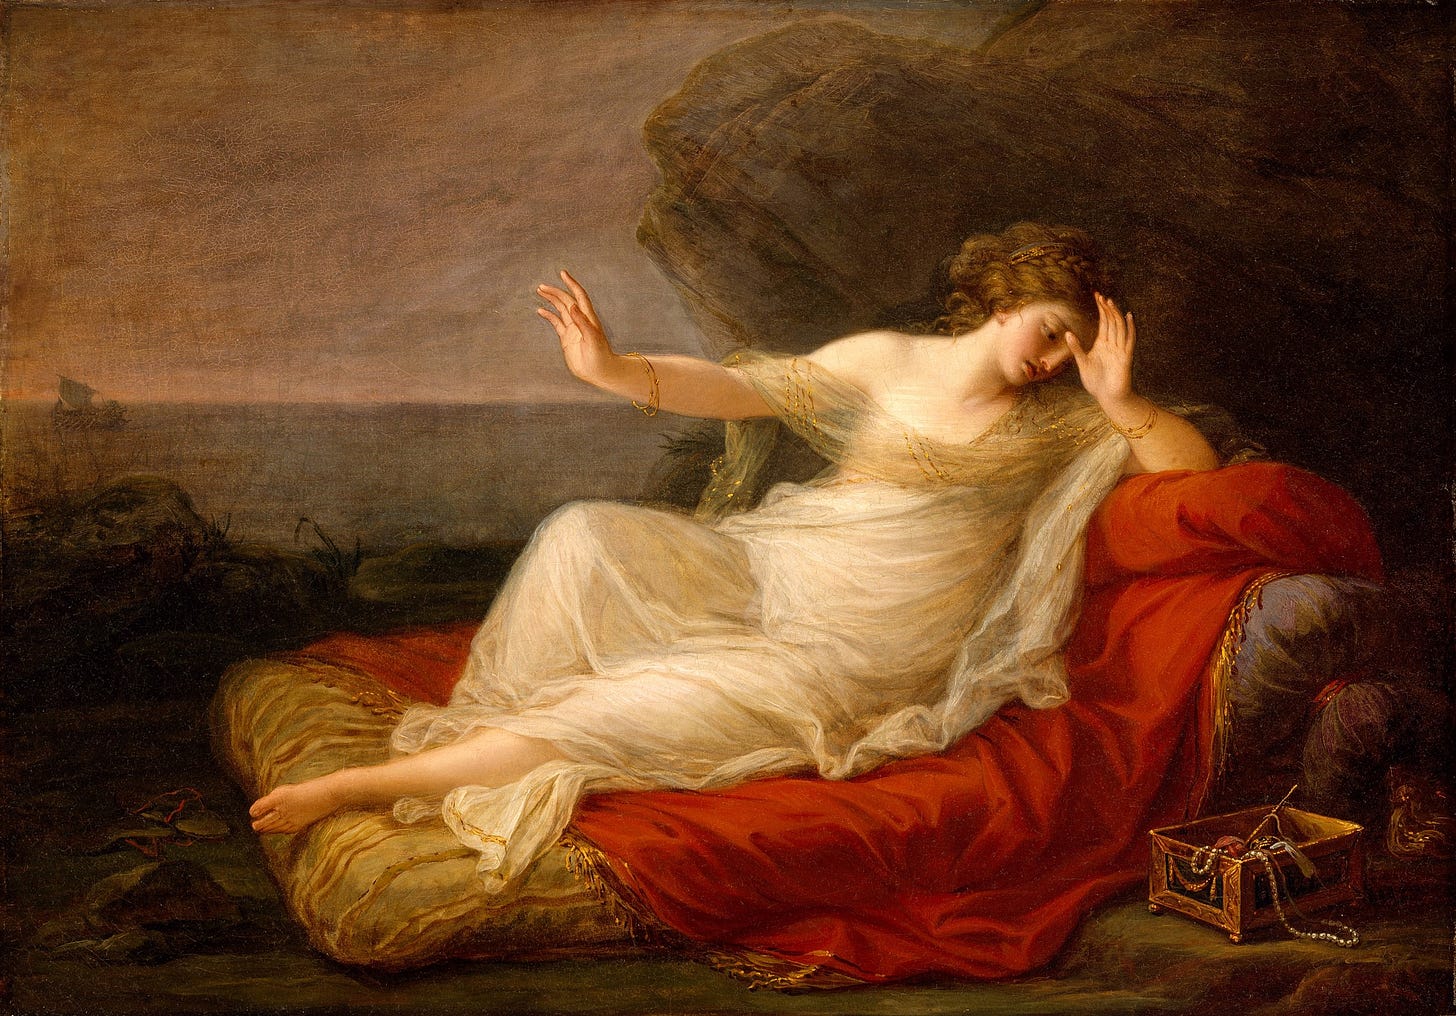 Woman in a white dress laying across a low cushion on a red blanket